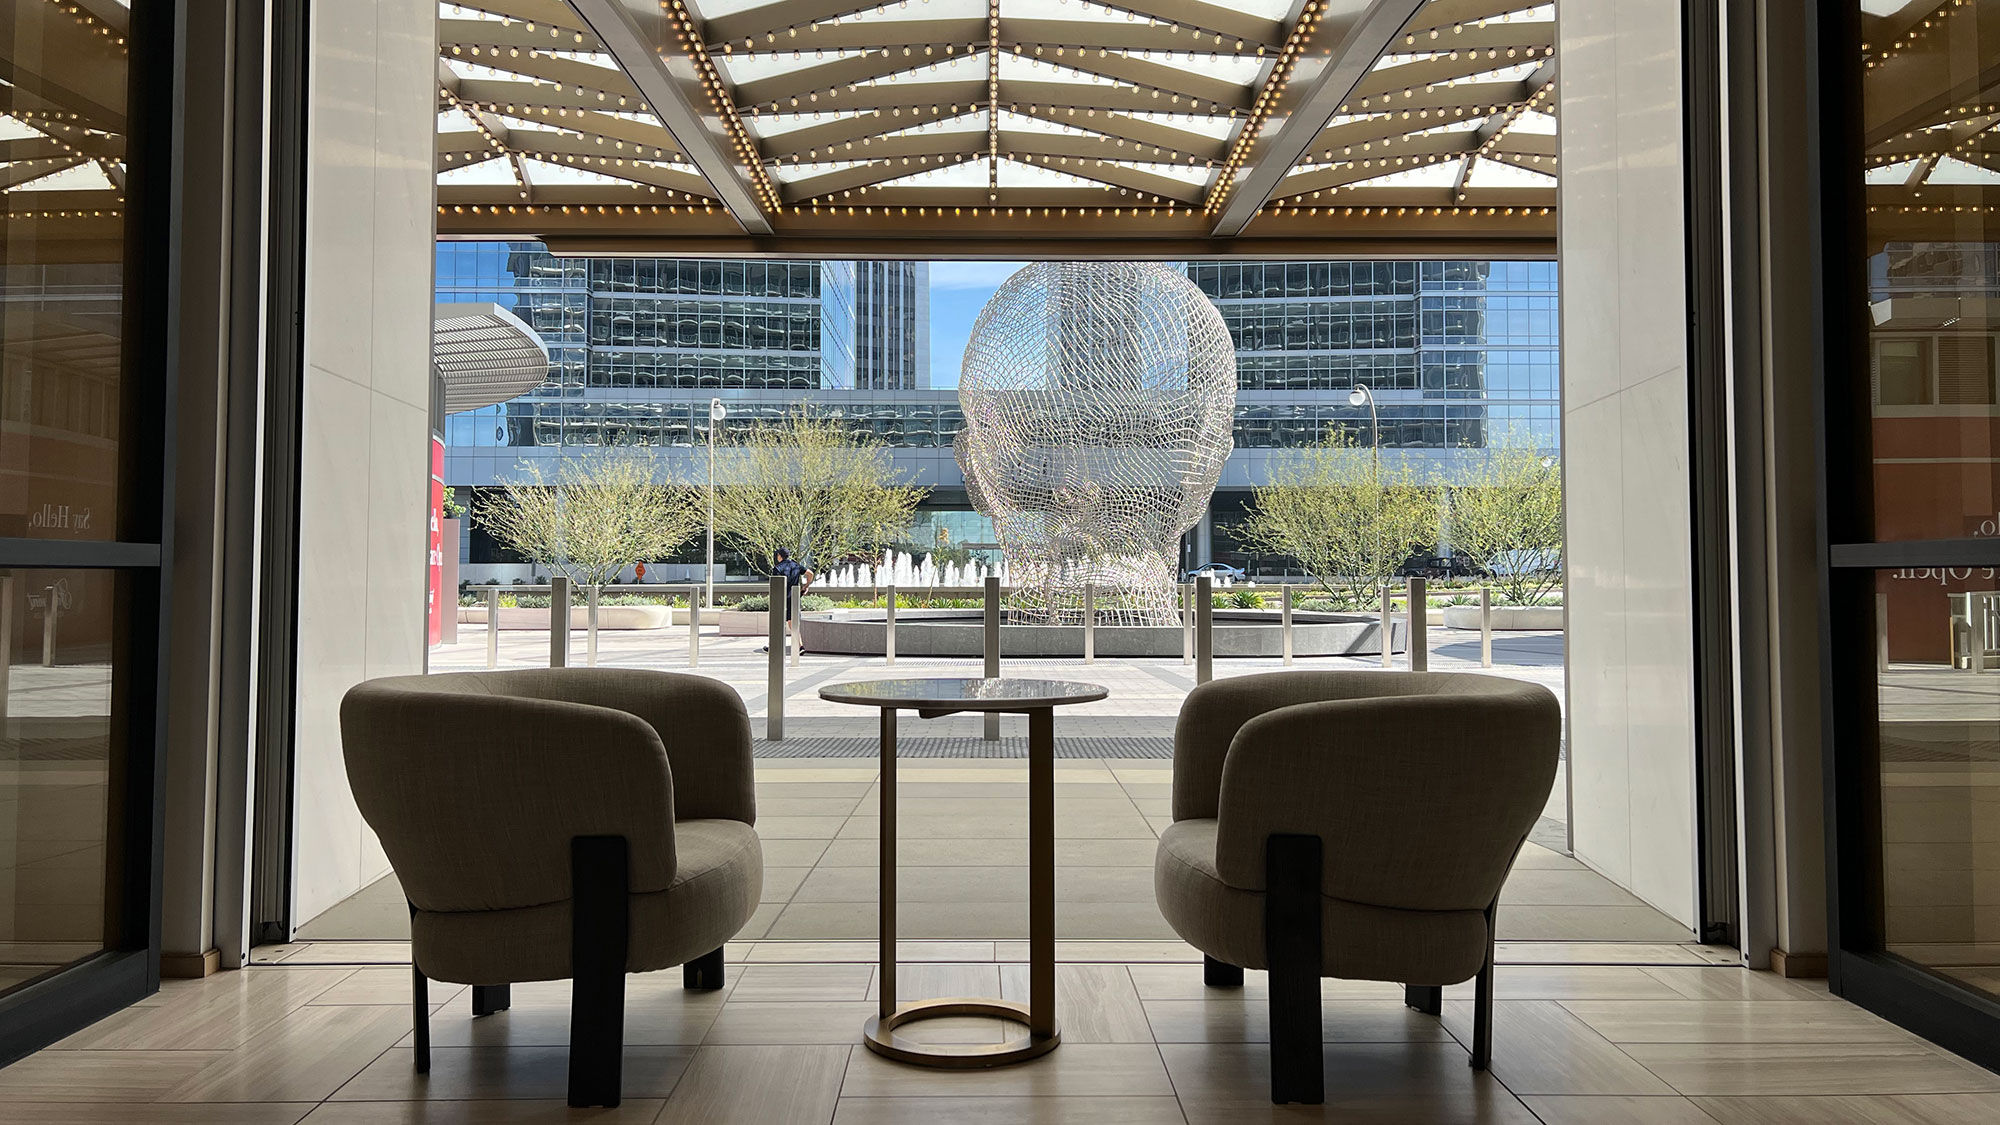 A lobby view of a sculpture by Jaume Plensa. Glass walls in the hotel's lobby sink into the floor, creating an indoor extension of the outdoors.